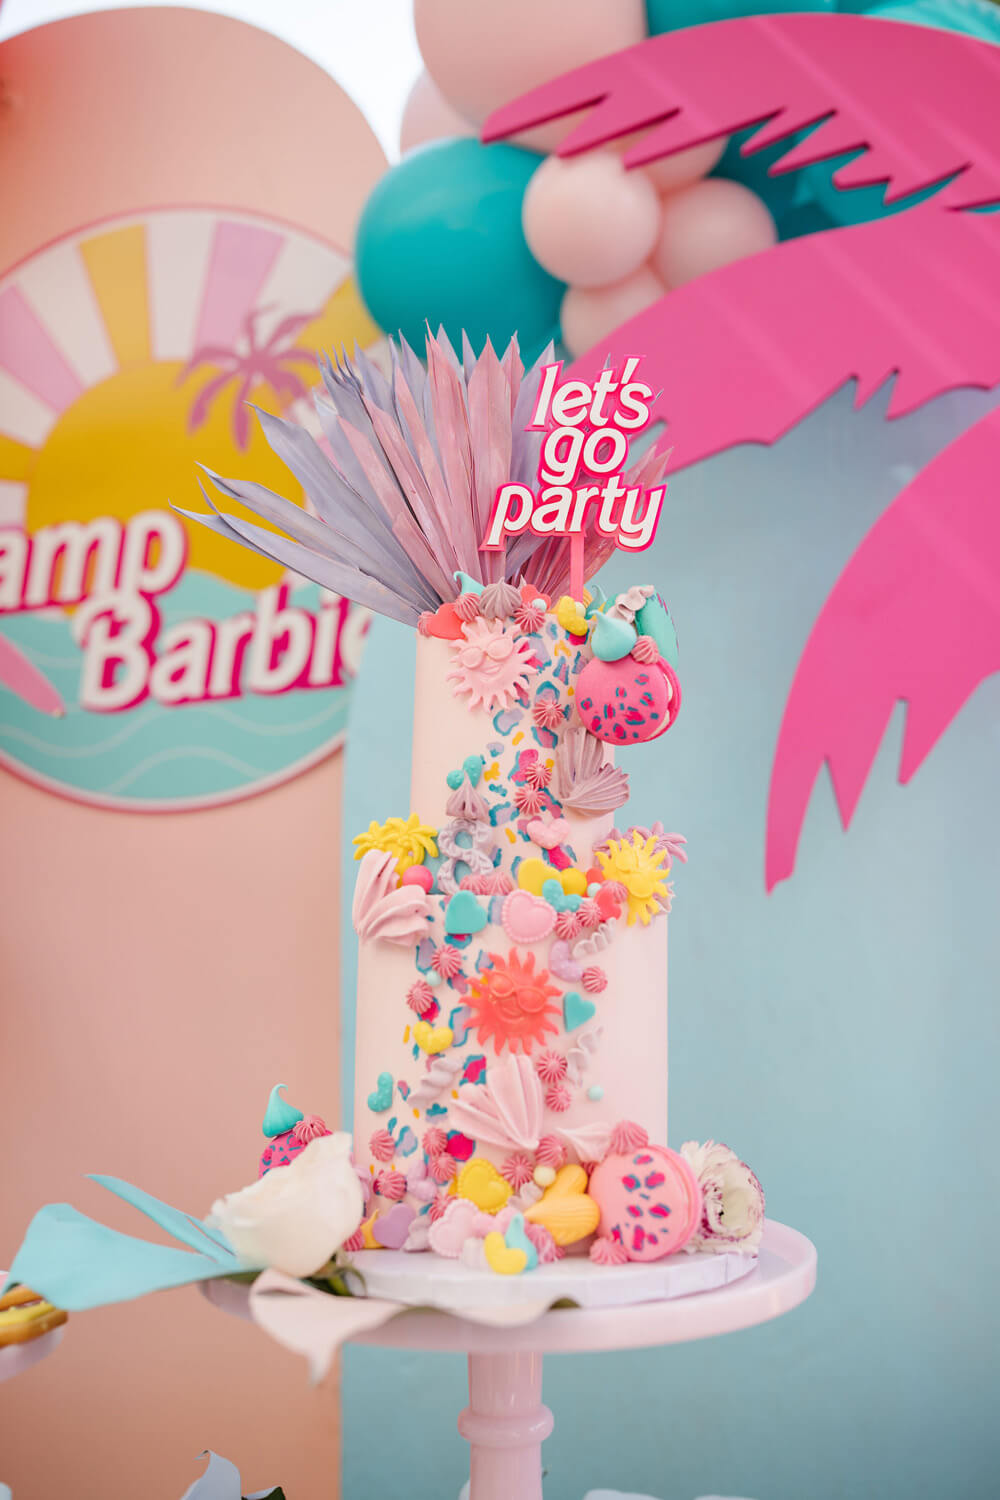 Coolest Homemade Quilted Barbie Birthday Cake